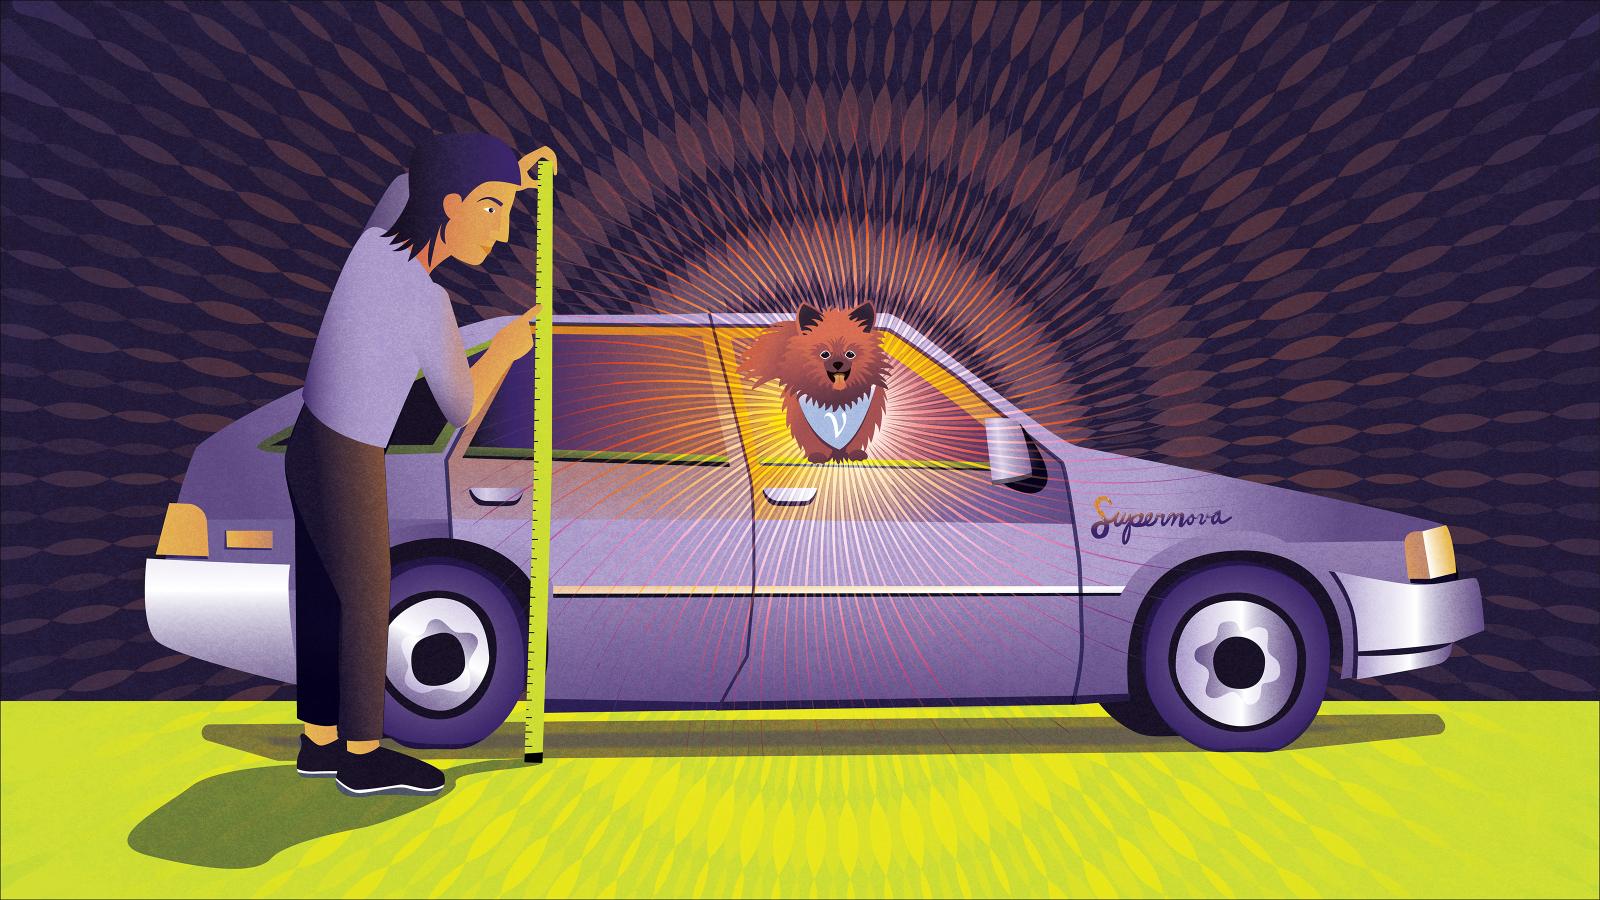 Illustration of a person measuring a "Supernova" car with a measuring tape